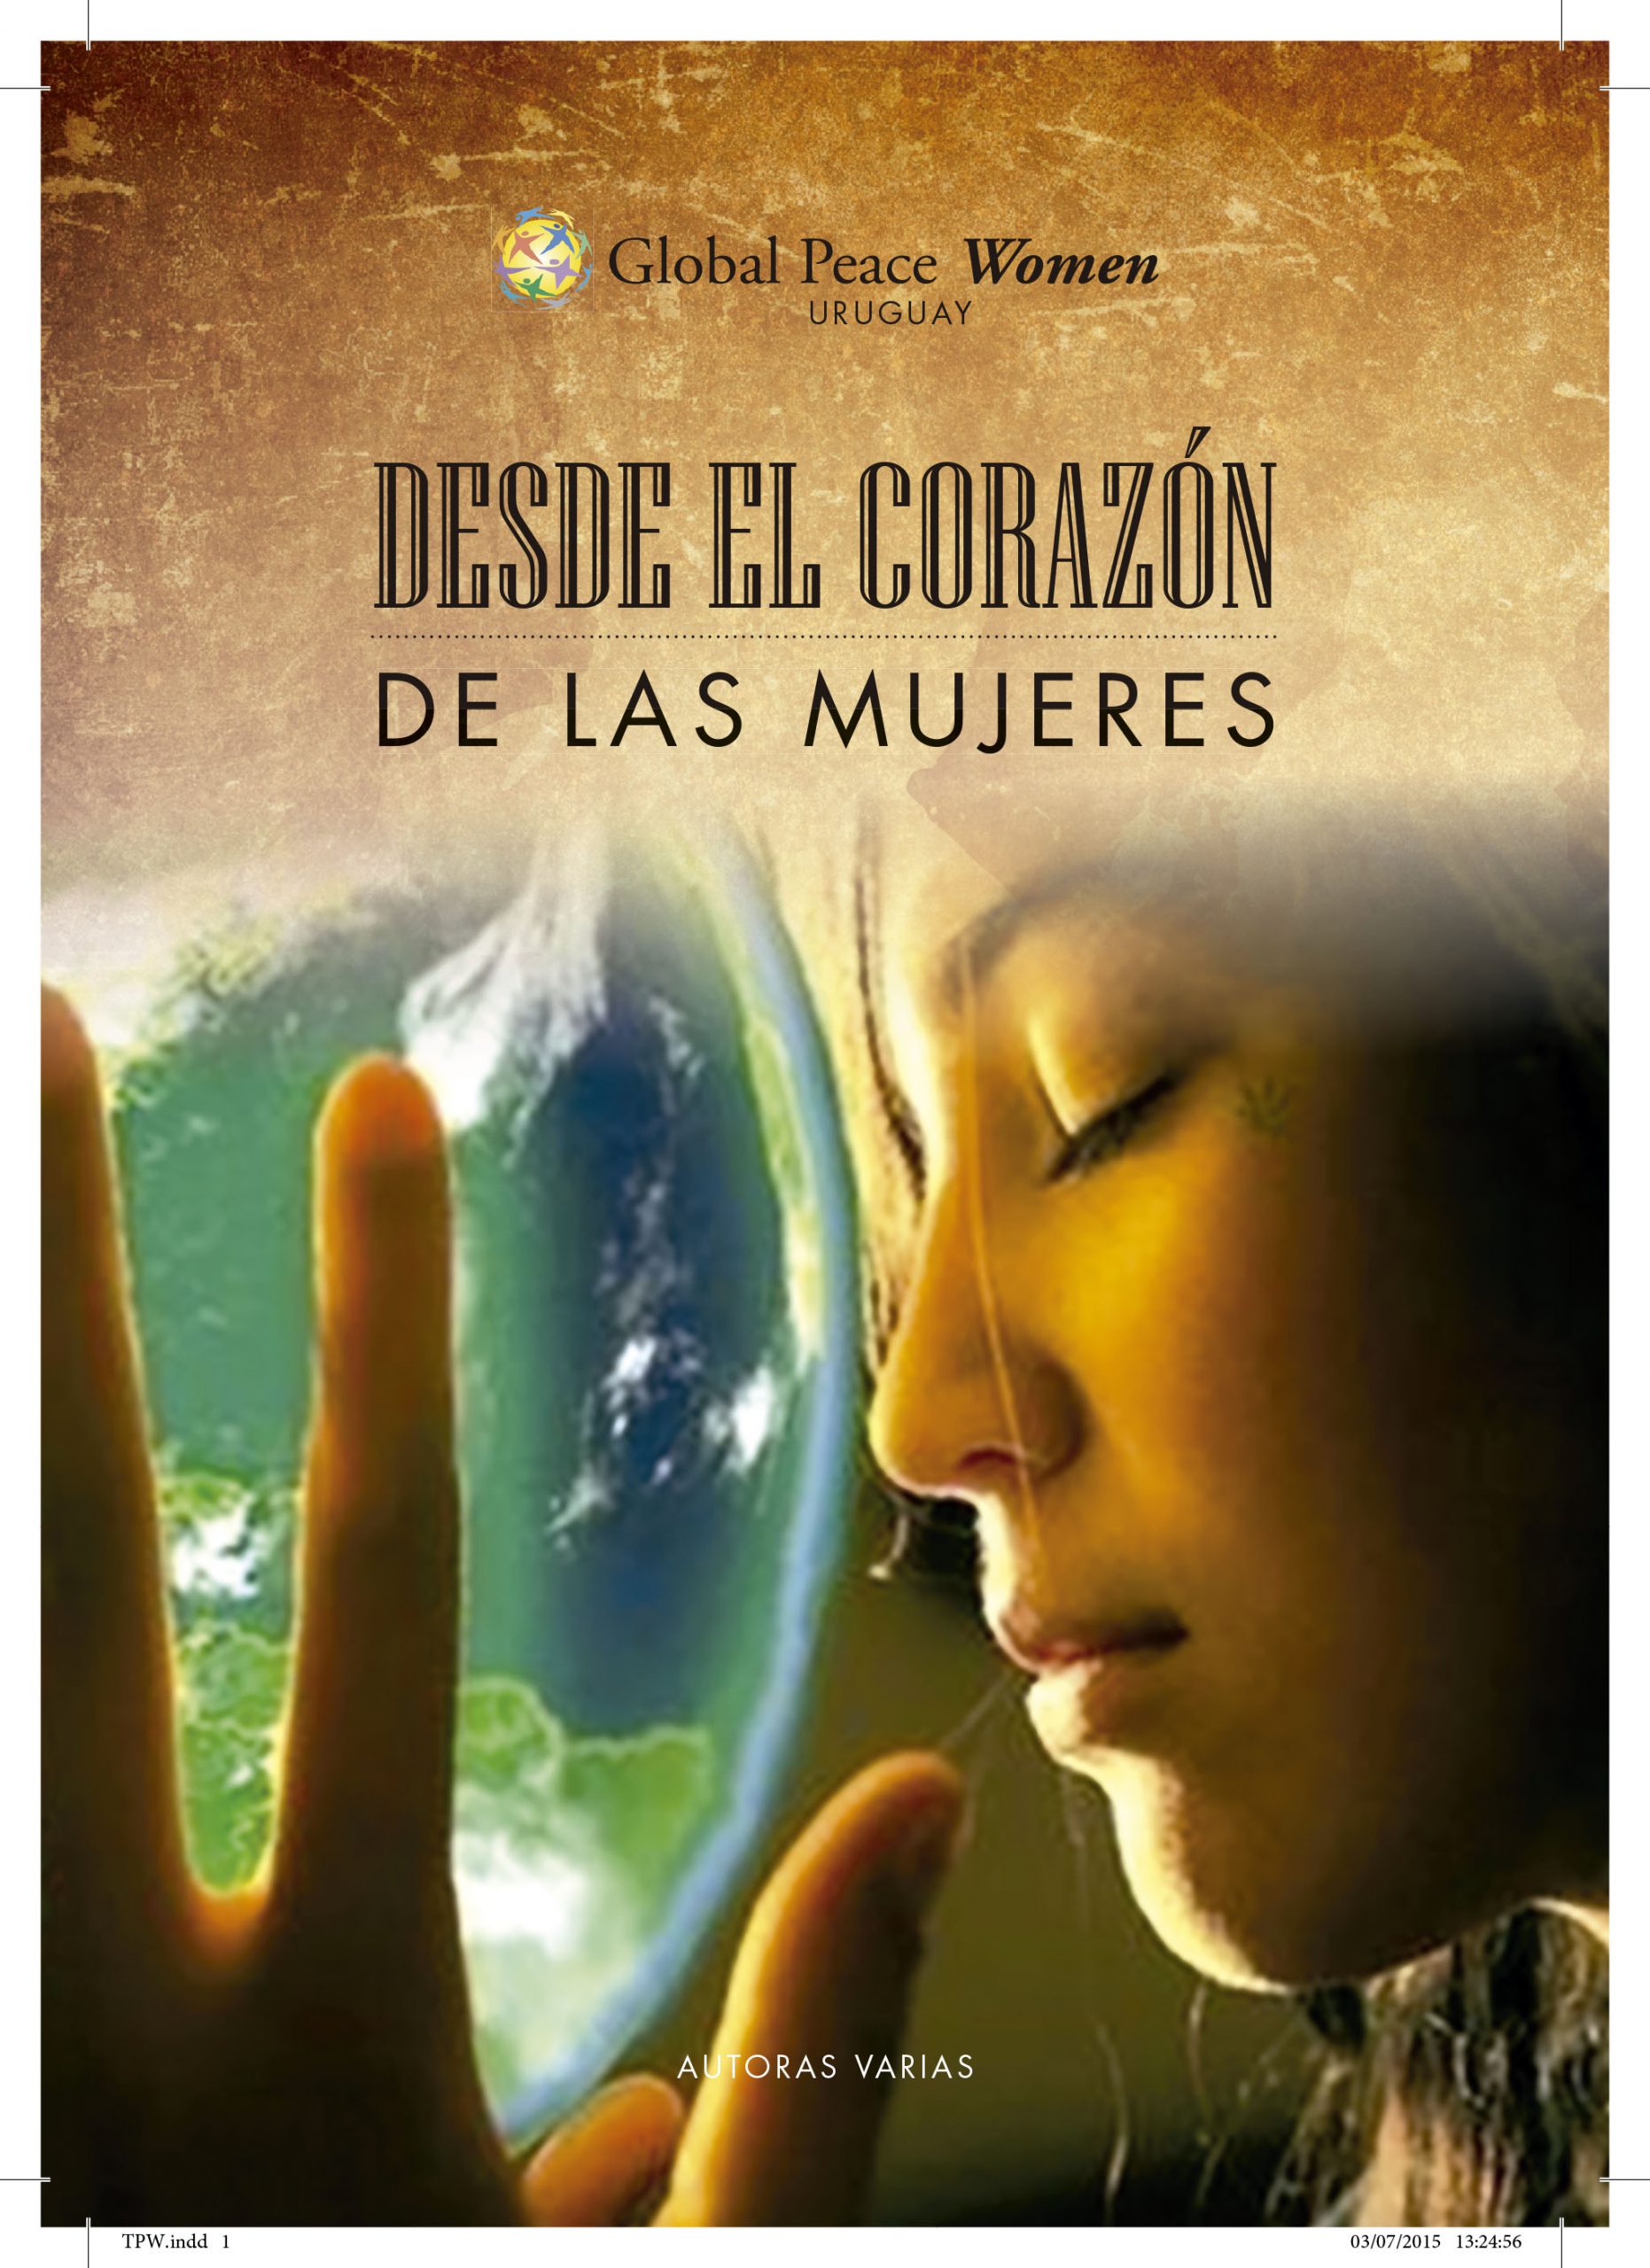 Cover of Global Peace Women Uruguay book, “From the Hearts of Women”